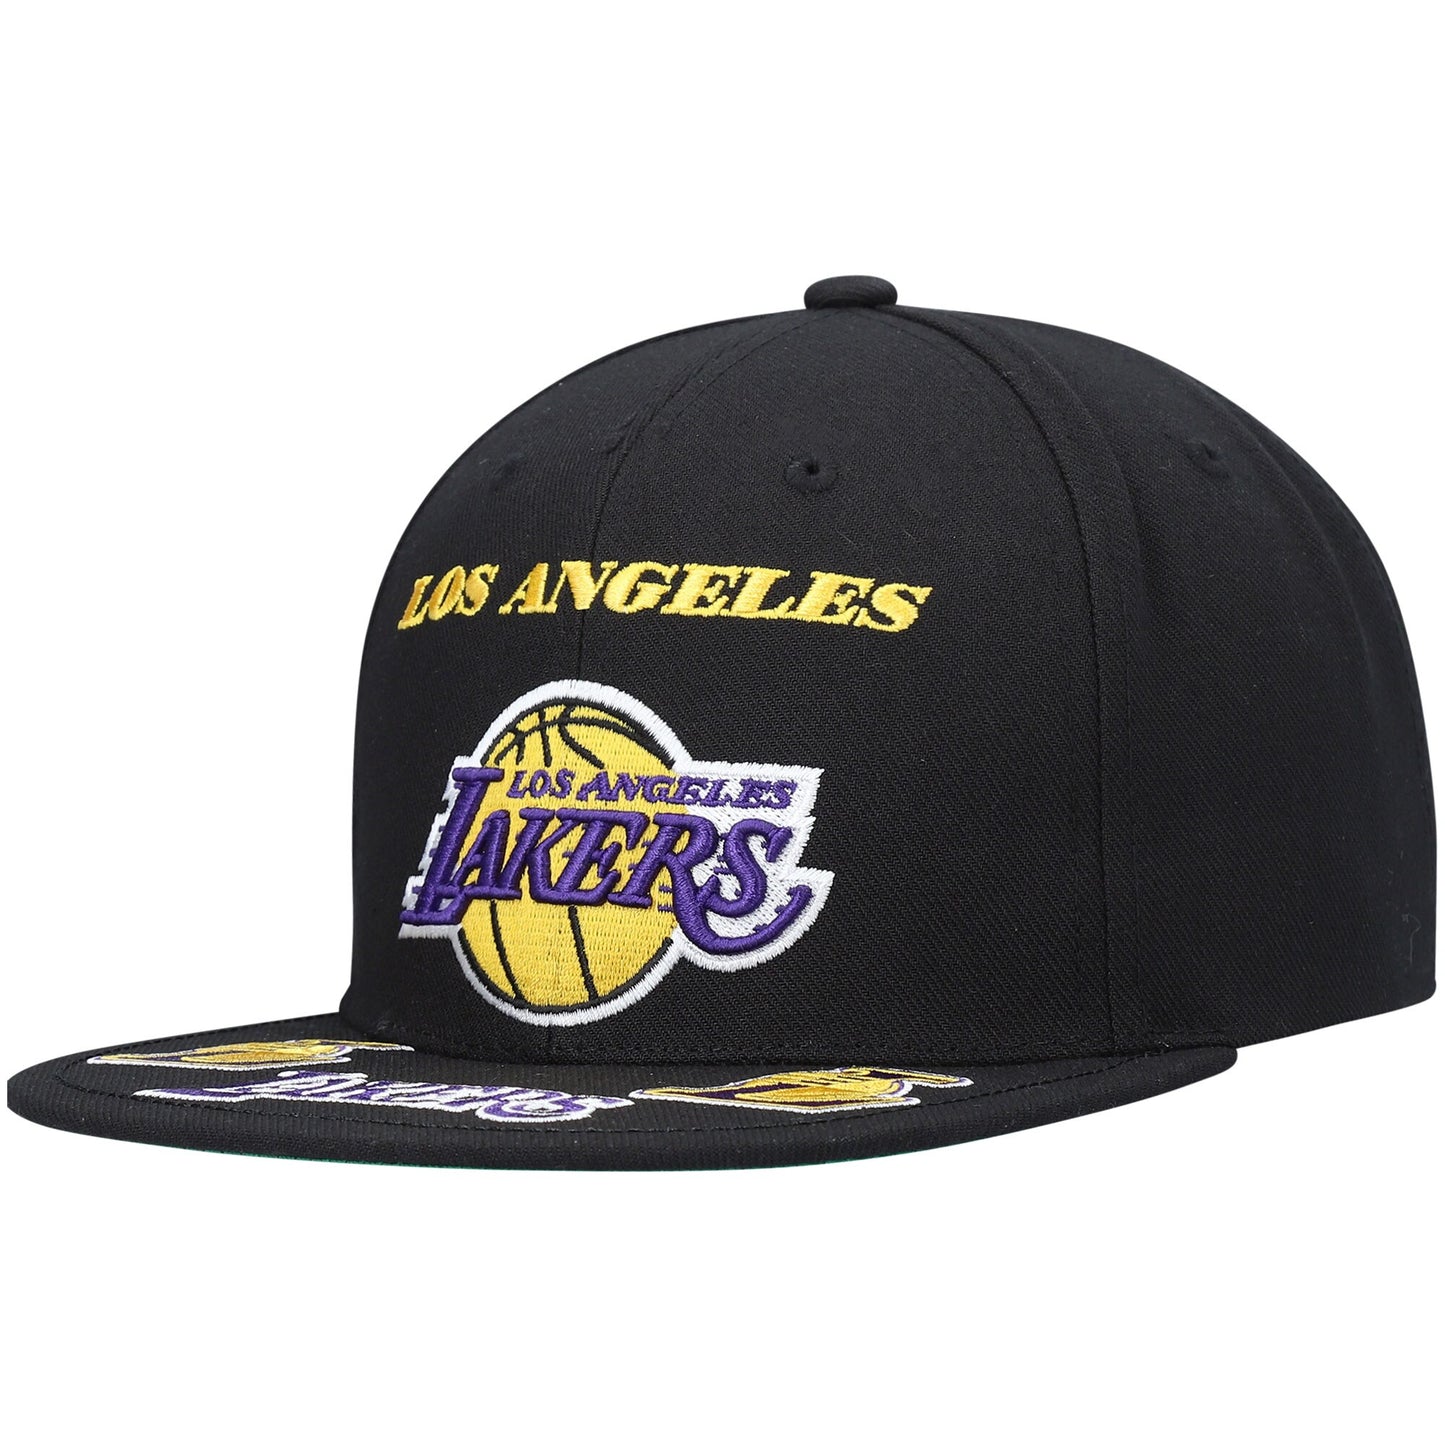 Los Angeles Lakers Mitchell & Ness Front Loaded Snapback Hat - Black